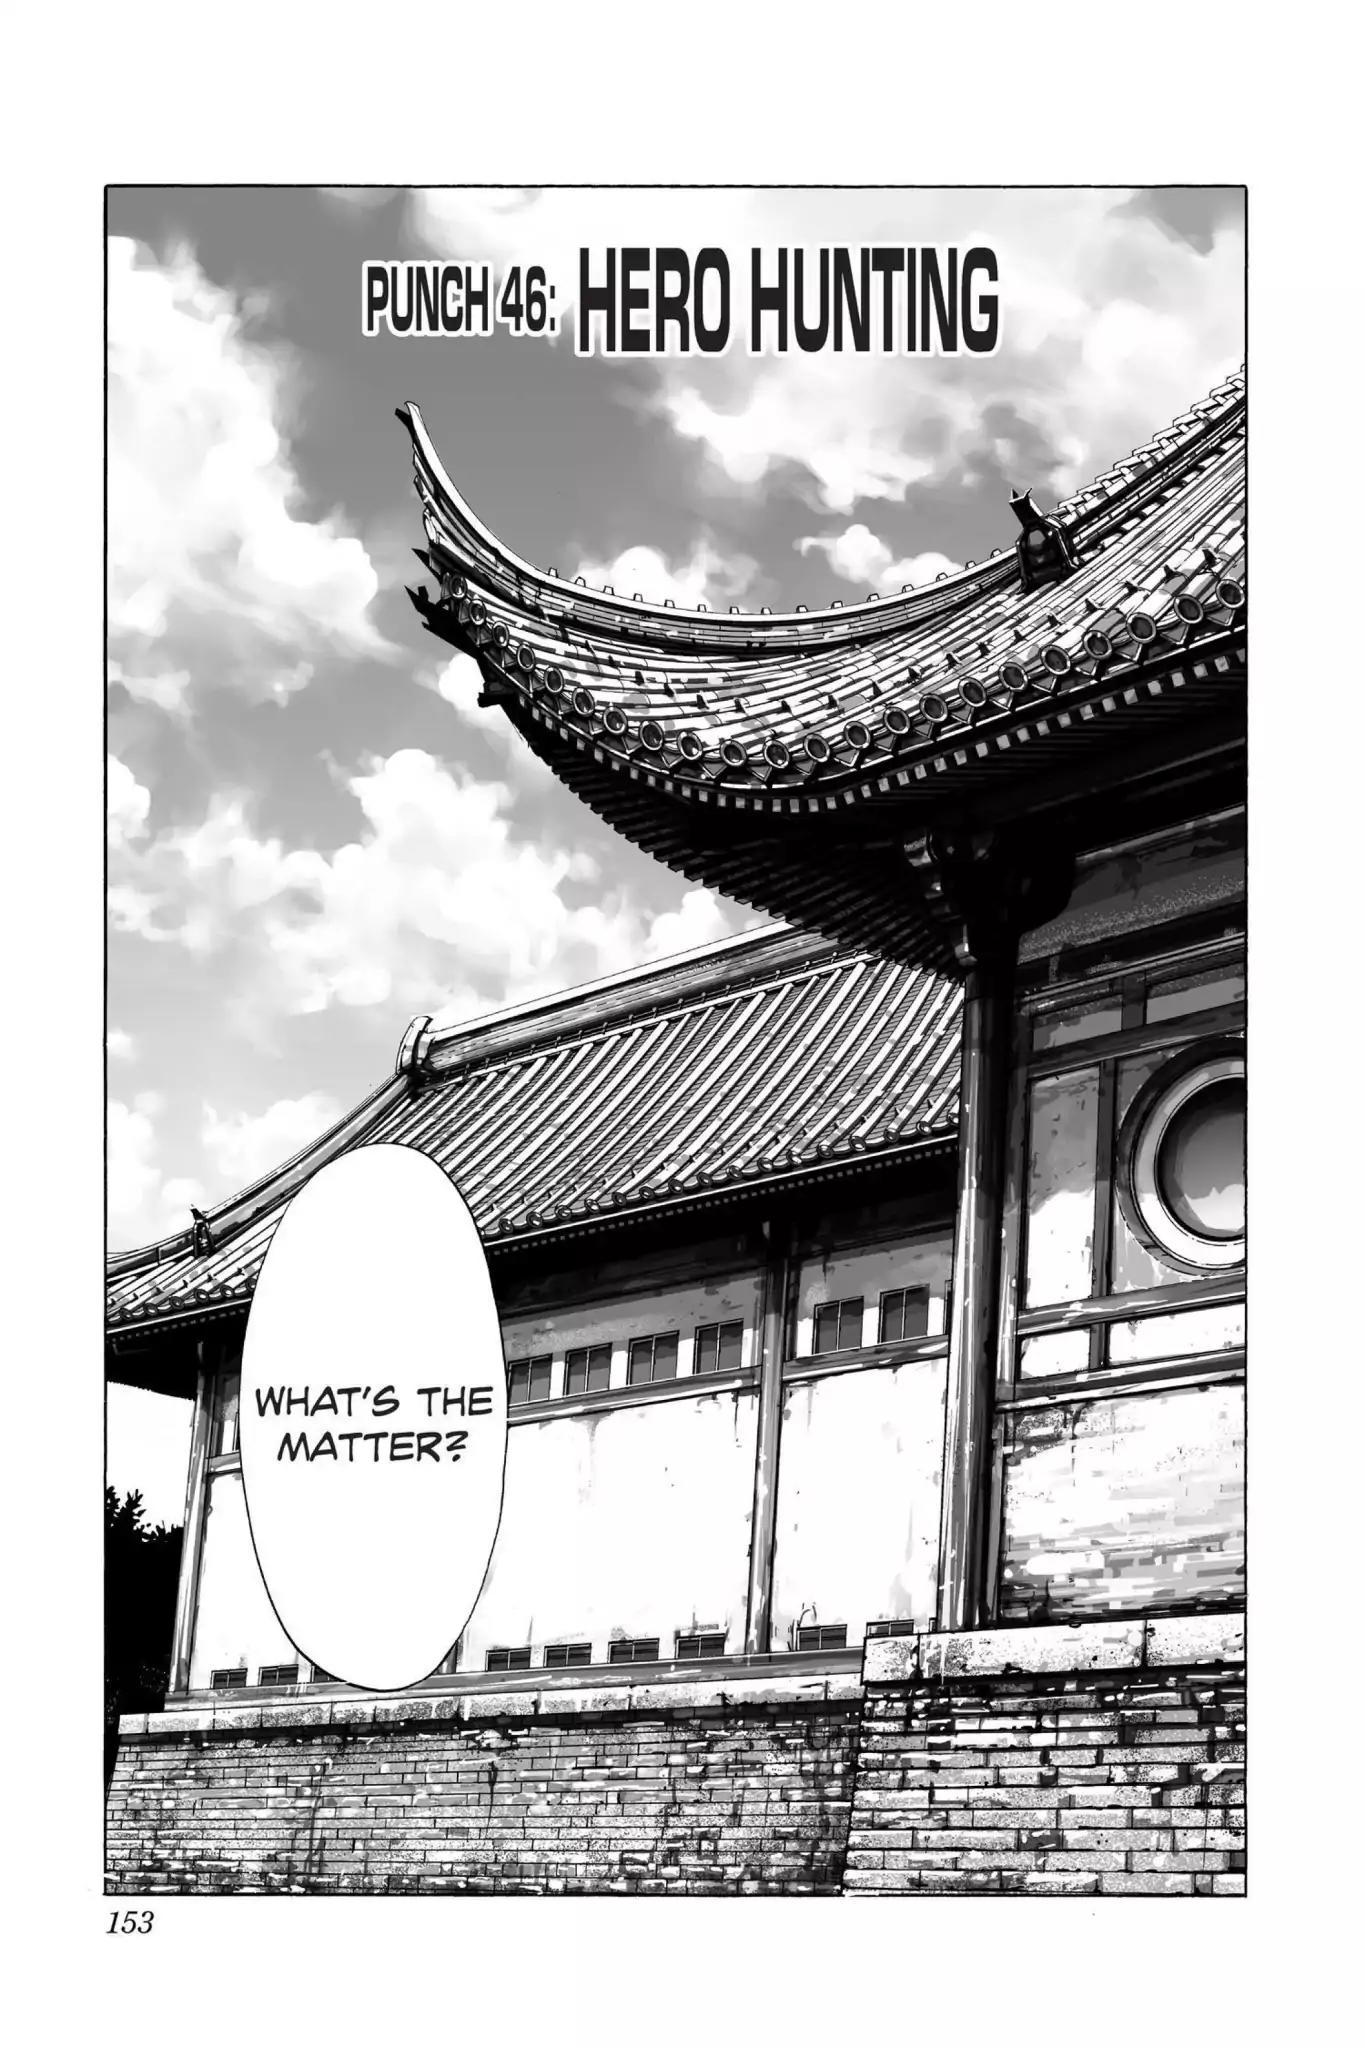 One Punch Man, Chapter 46 Hero Hunting image 01